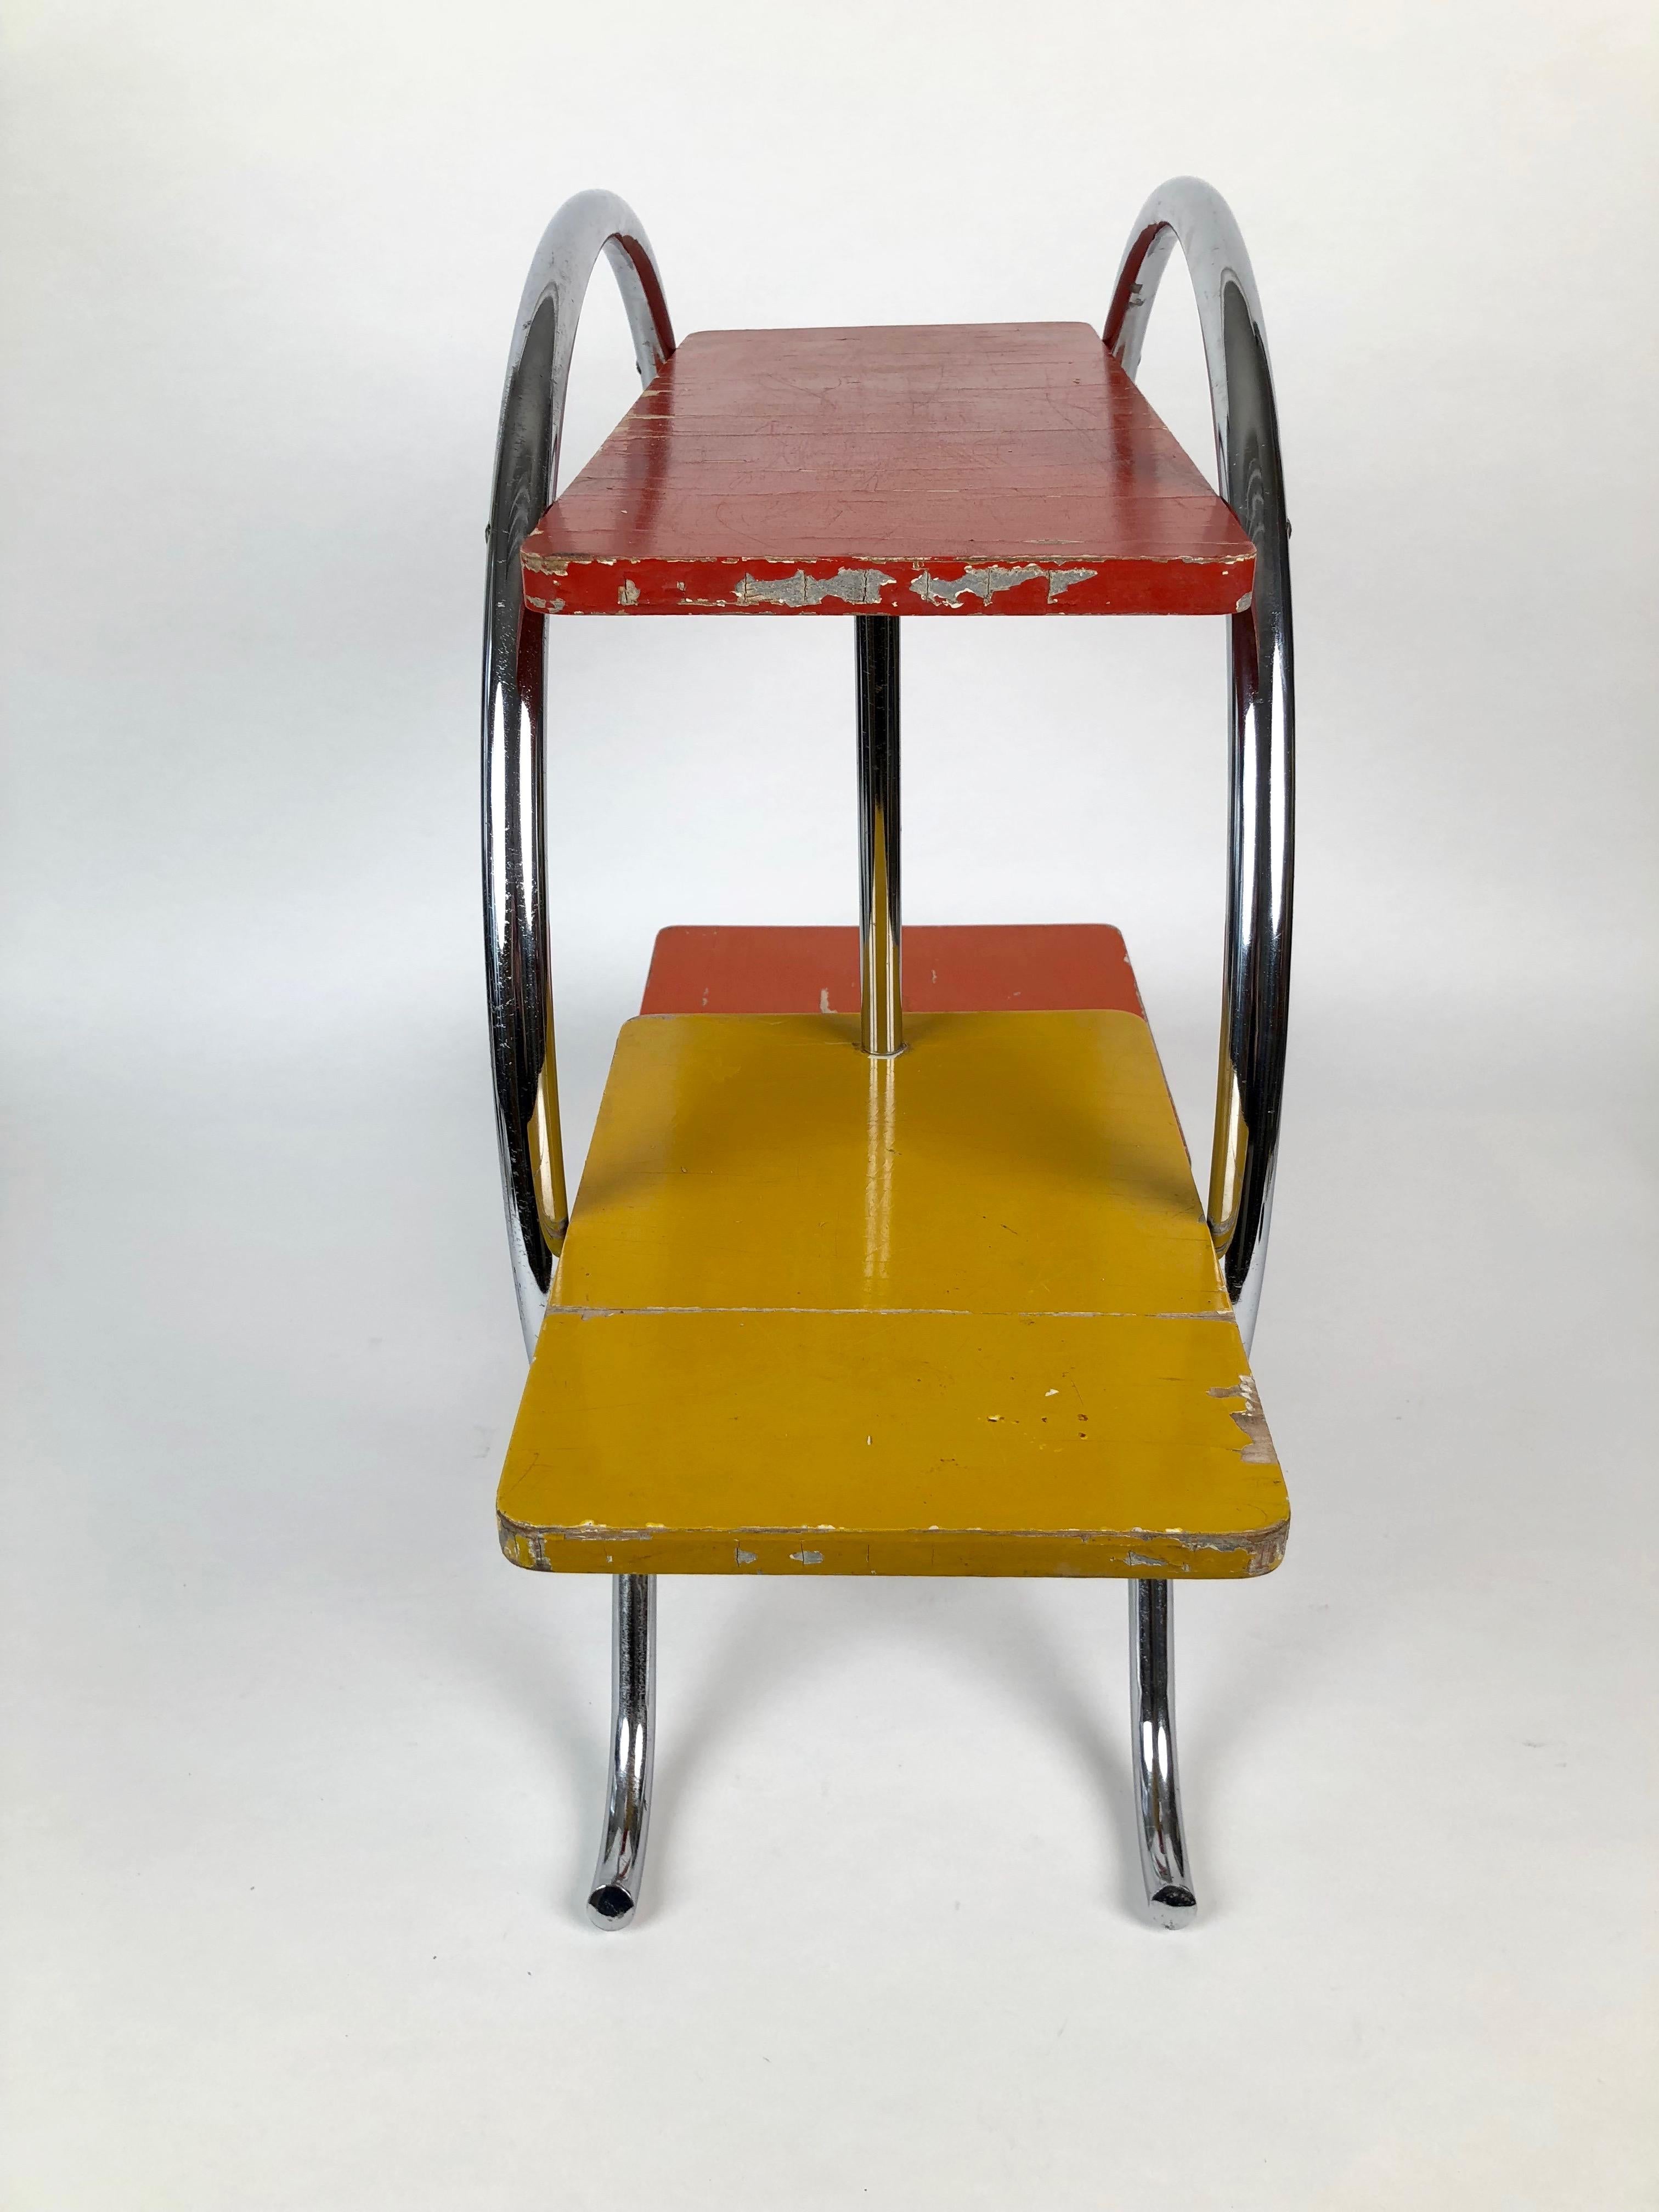 Chrome Etagere with Coral, Yellow and Red Painted Shelves in Bauhaus Style For Sale 2